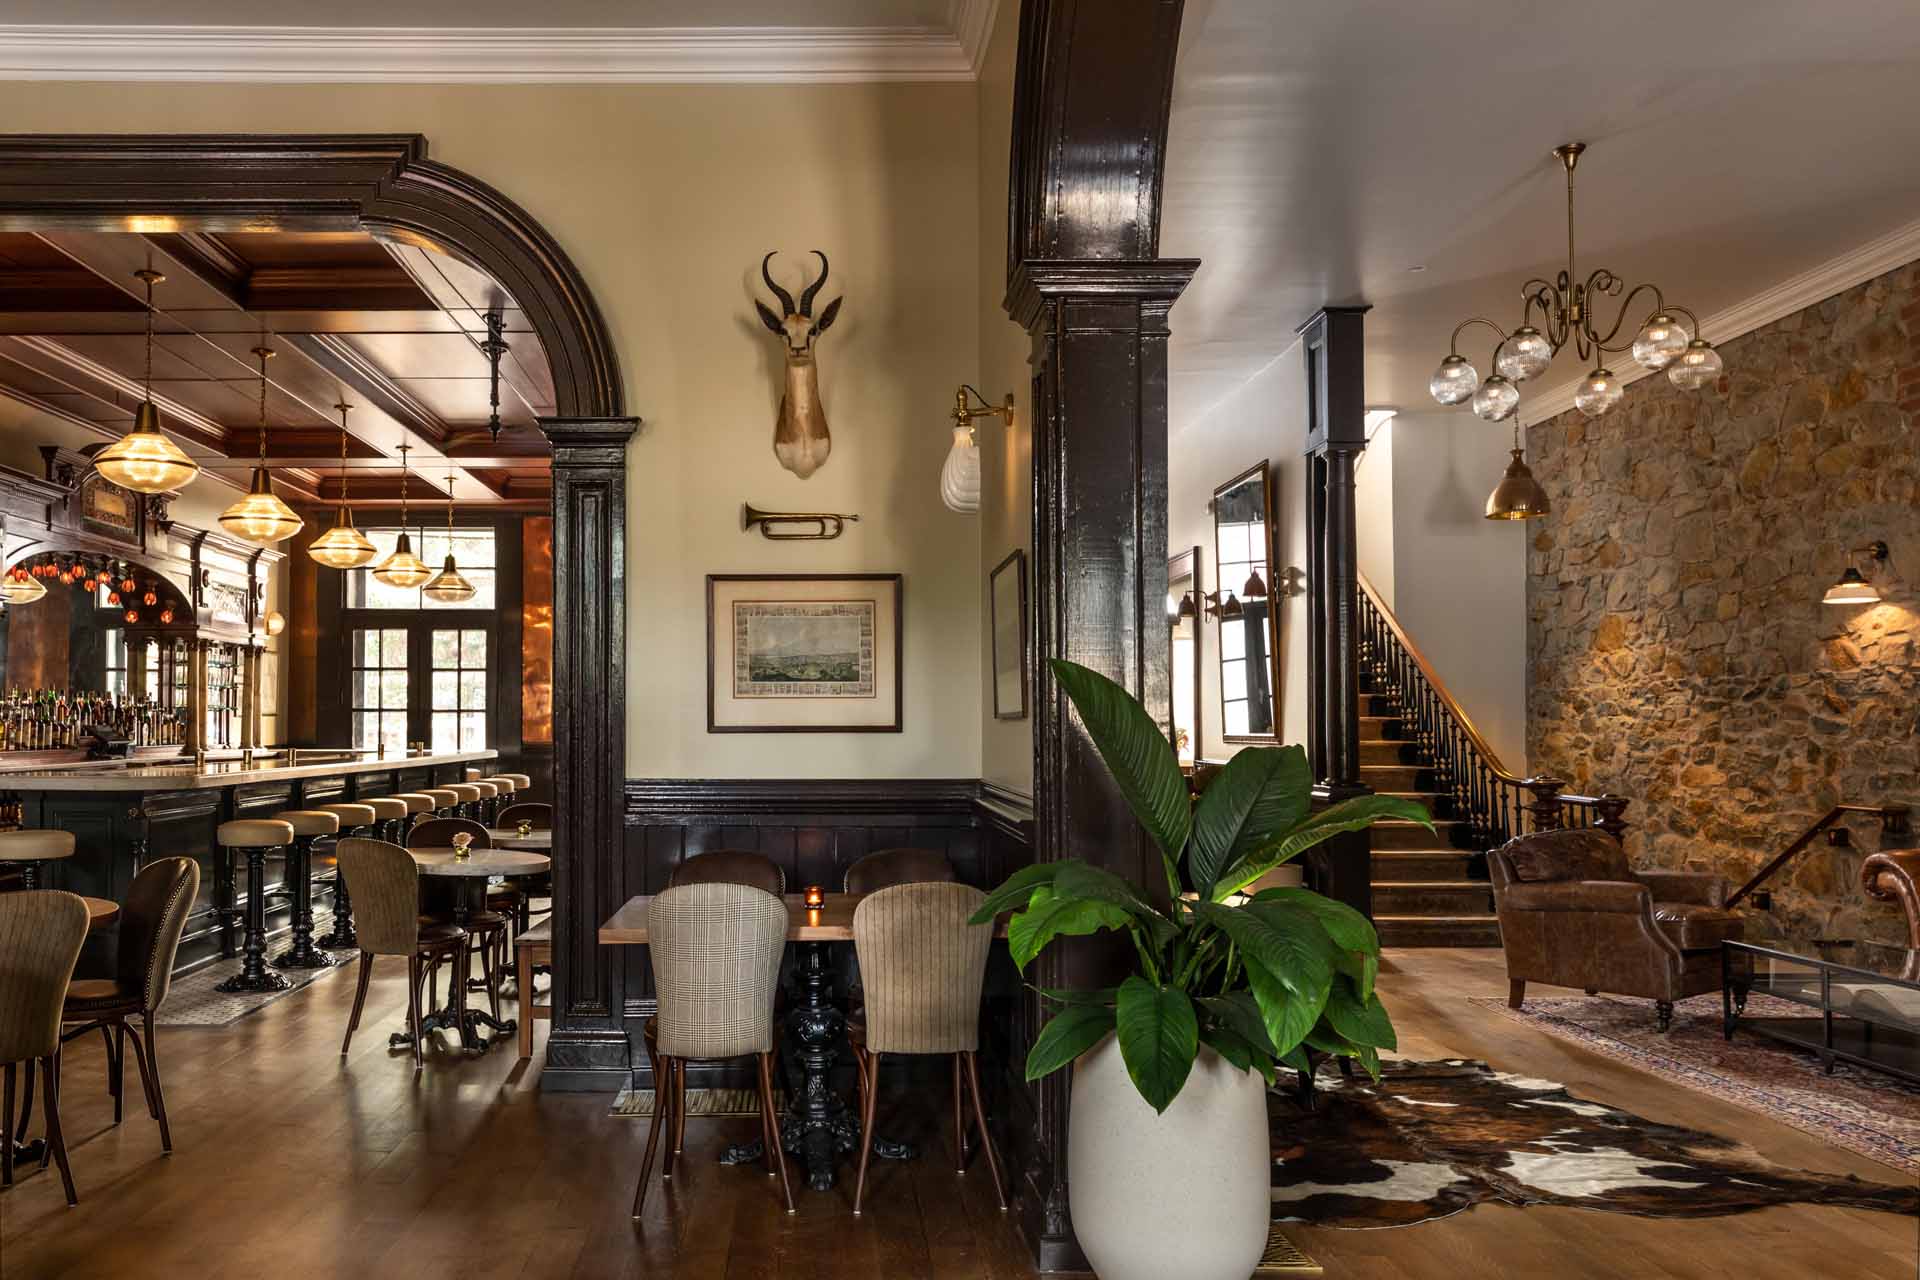 Beautiful victorian renovation at the Golden Gate Saloon Restaurant at the Holbrooke Hotel